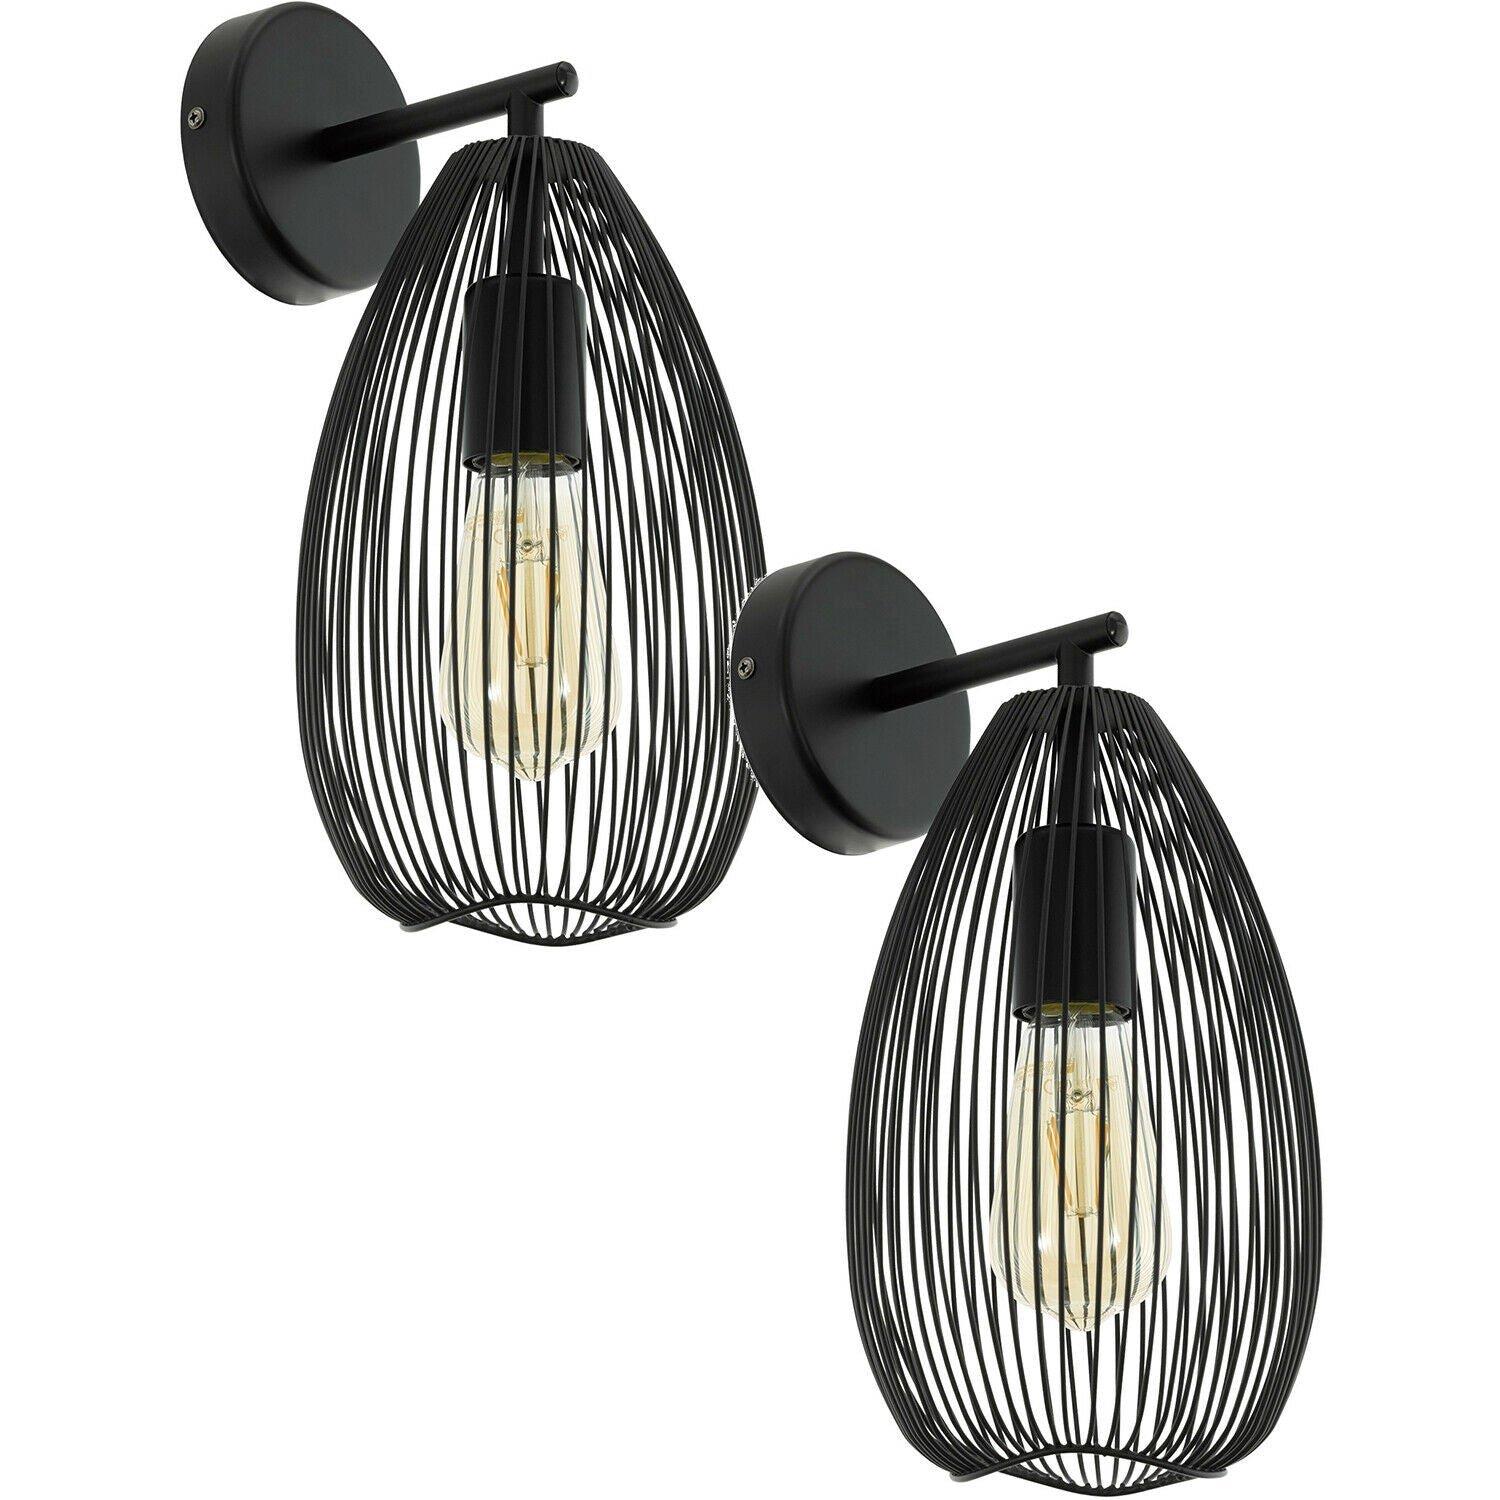 2 PACK LED Wall Light / Sconce Black Steel Wire Cage Shade 1x 60W E27 Bulb